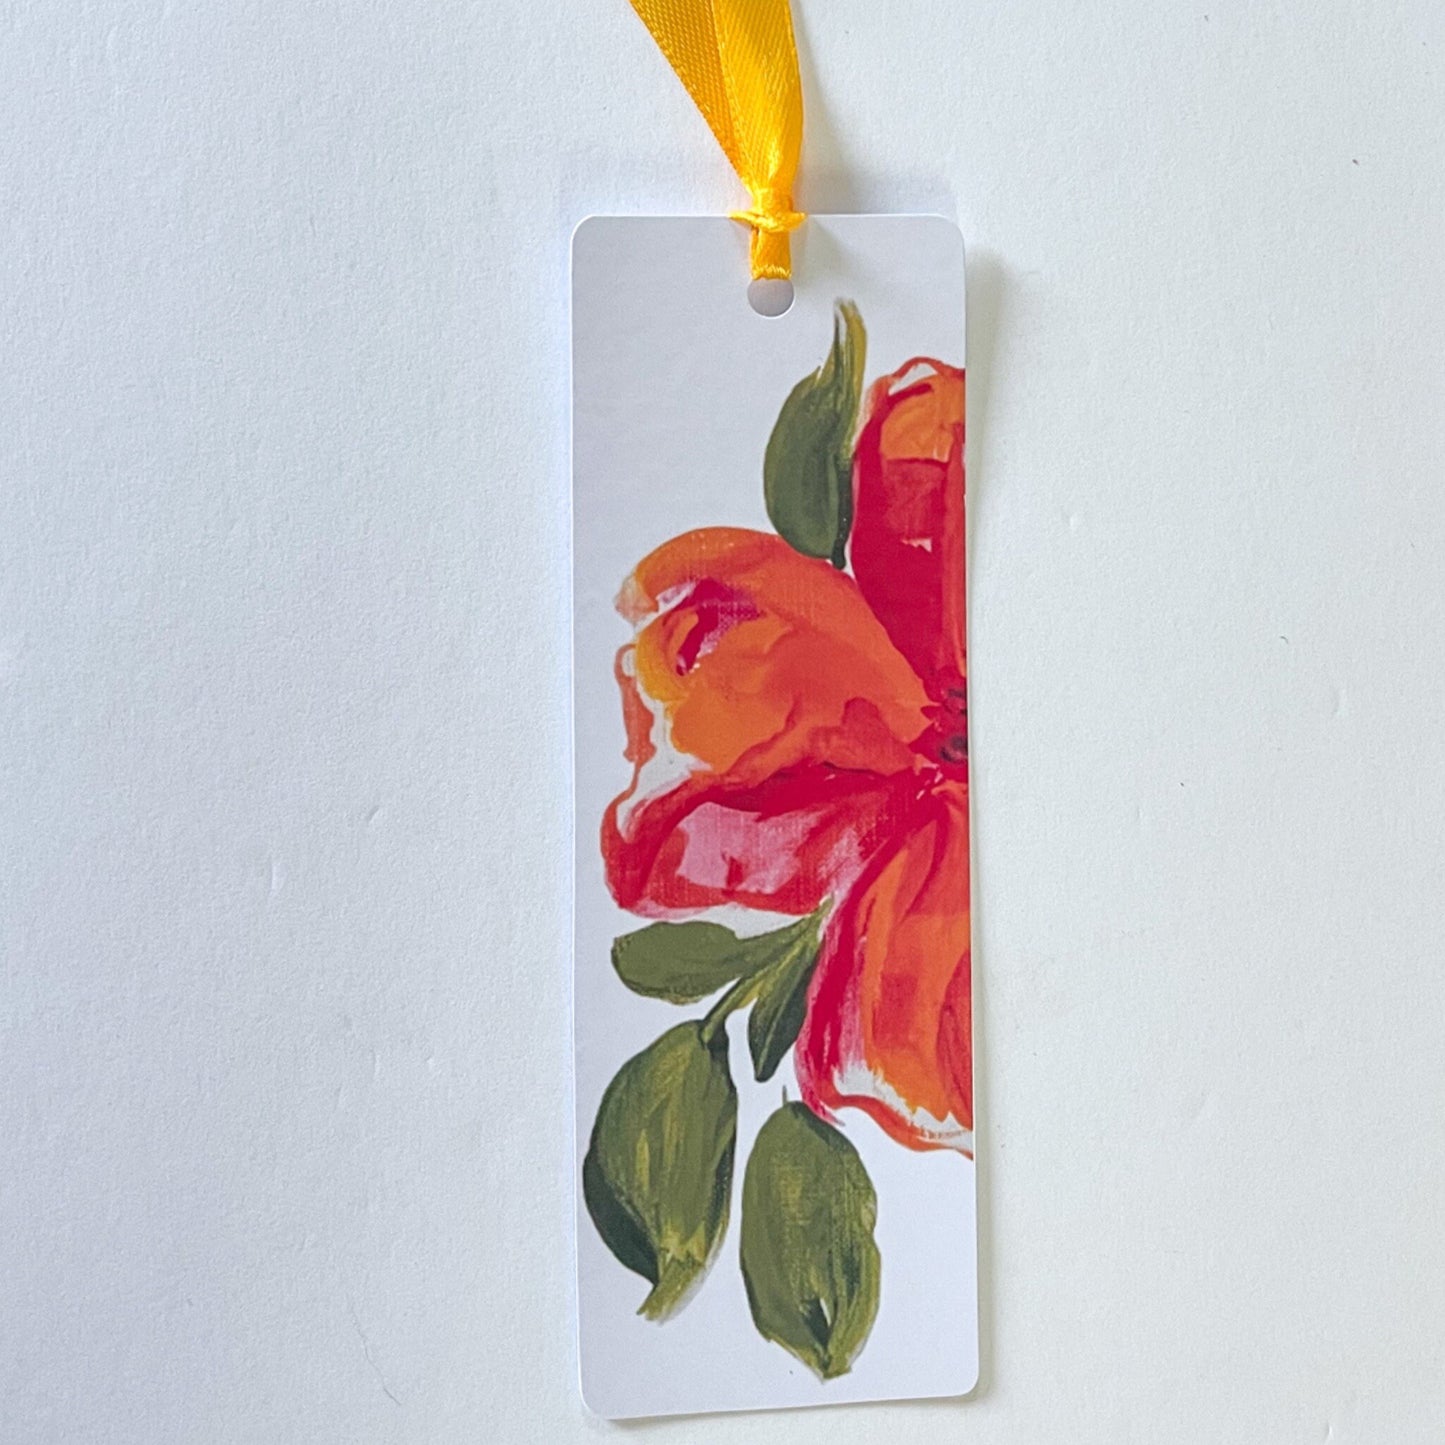 Art Bookmark "Expressive Floral" - 2x6 inches High Glossy Finish